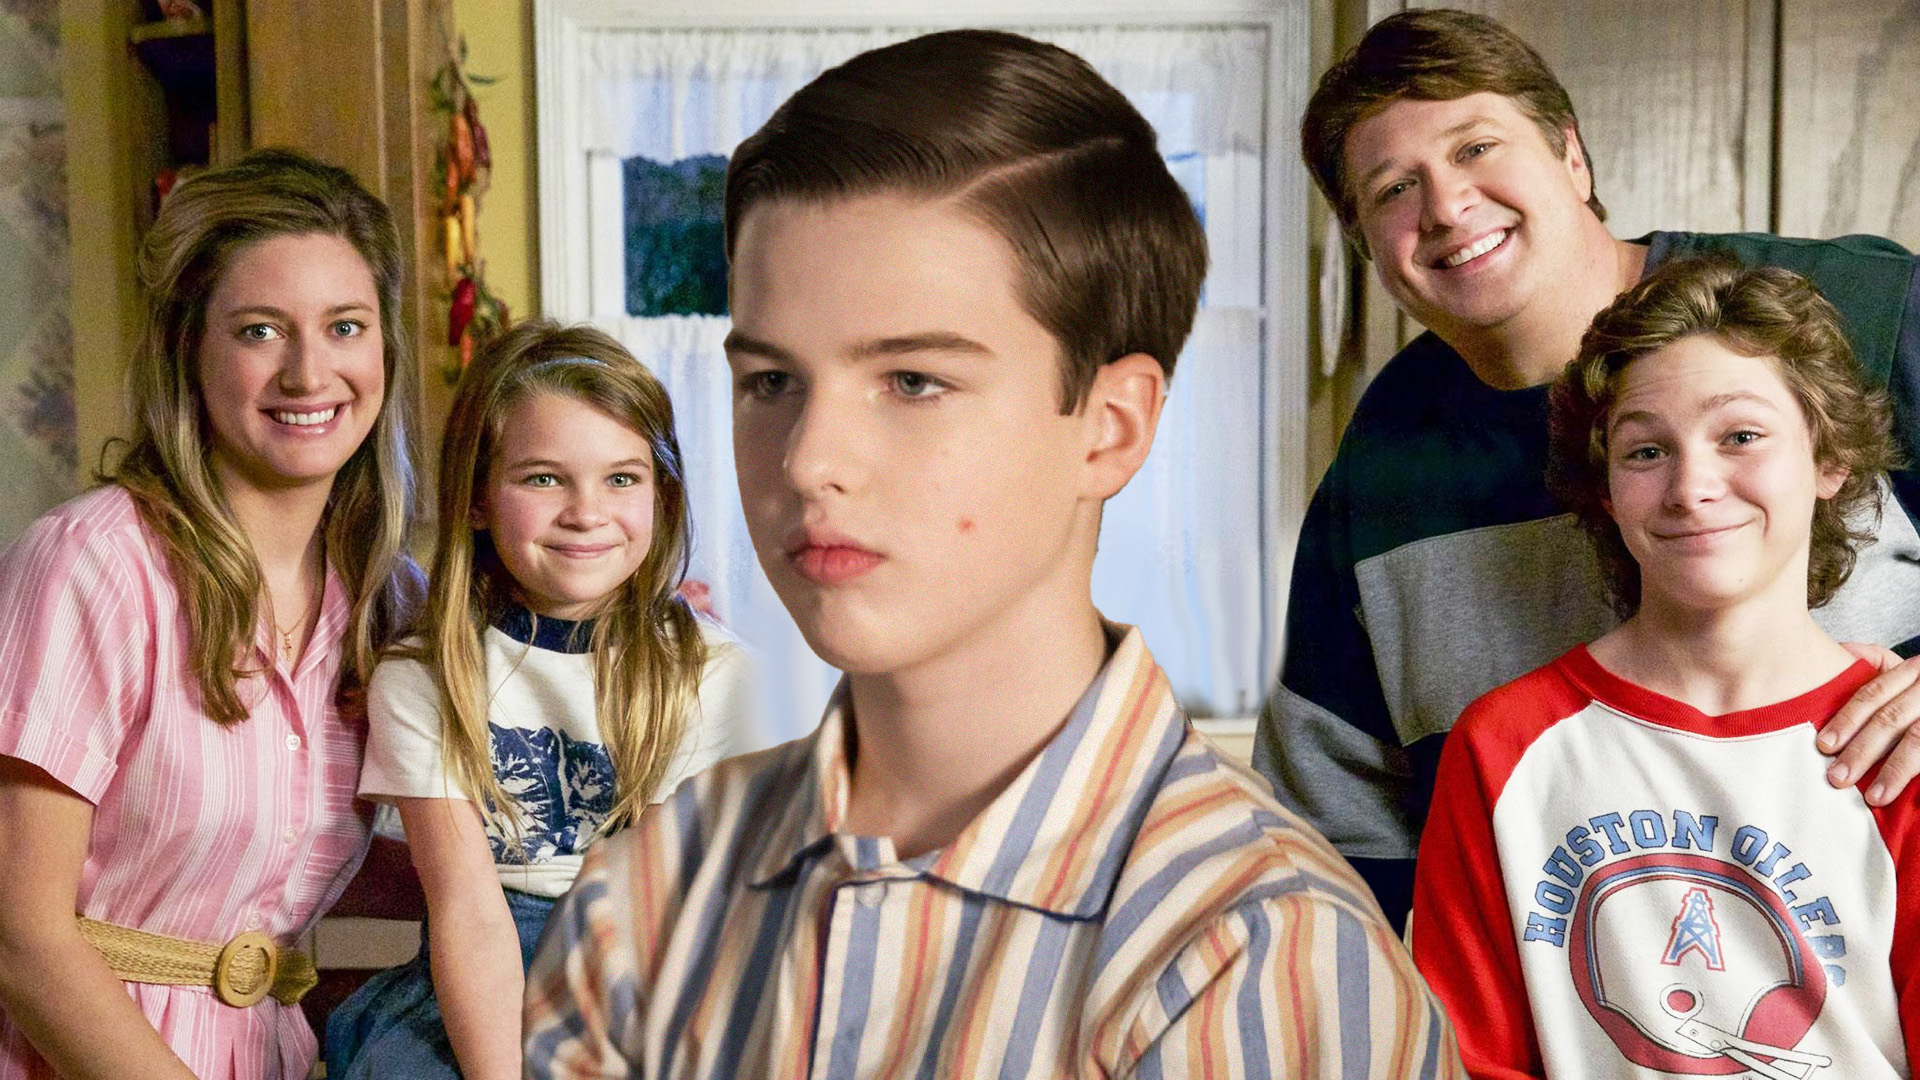 Exciting News: Young Sheldon's Final Season 7 Air Dates Revealed - What to Expect from Sheldon's Last Adventures